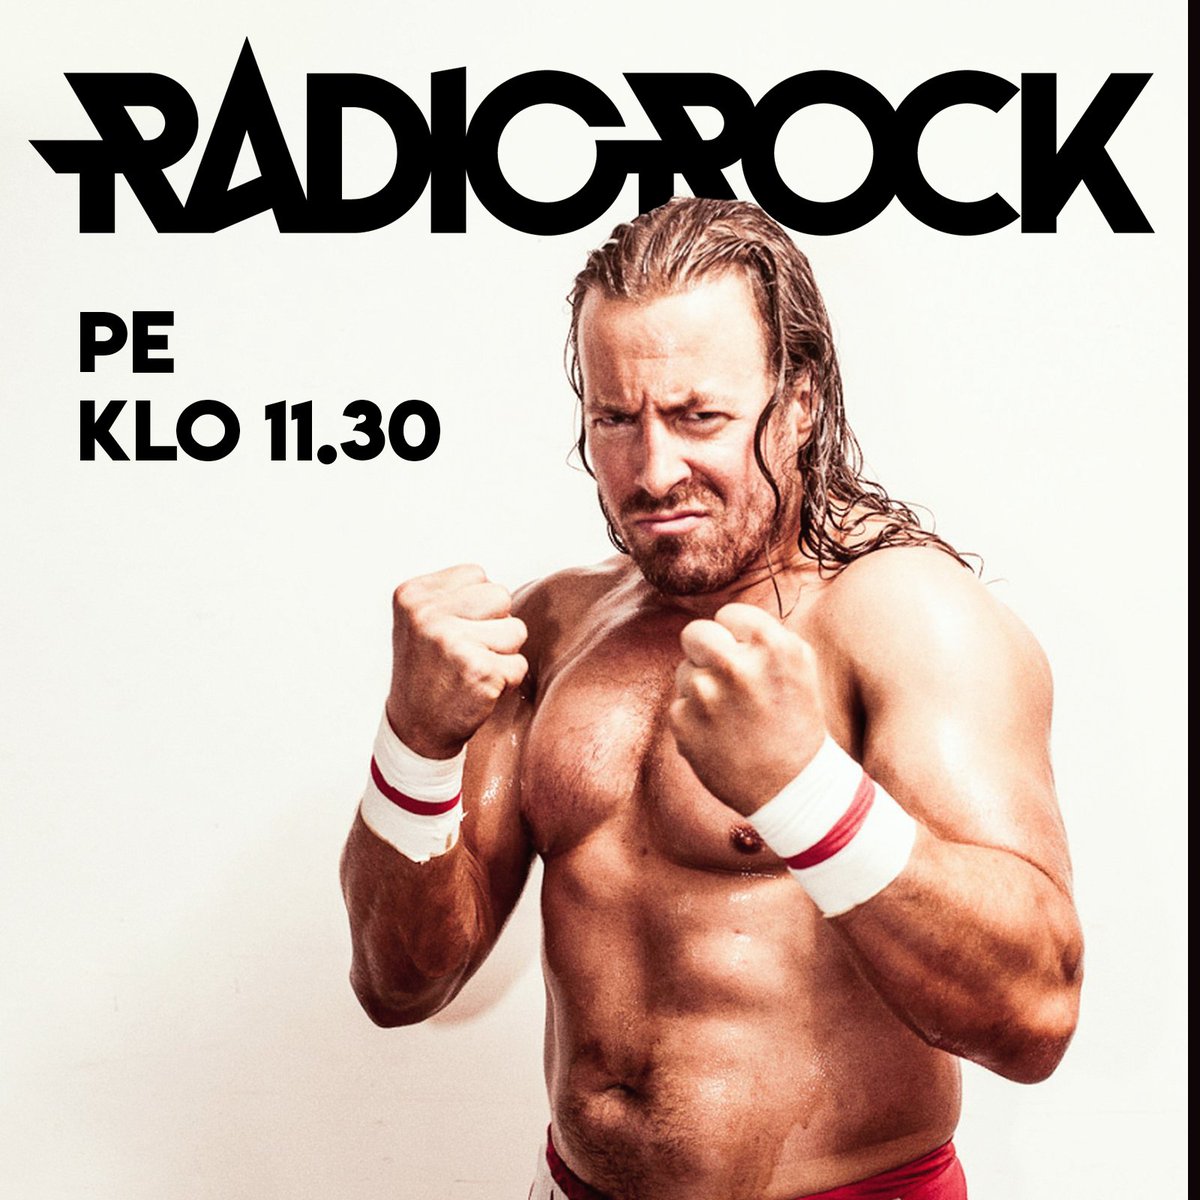 EU wrestling champion @RebelStarBuck will be LIVE on @RadioRockSuomi at 11:30 today noon talking about the big Hell City SLAM! event TONIGHT outdoors at Teurastamo Helsinki with talent from 8 countries! 

#slamwrestlingfinland #prowrestling #WrestlingTwitter https://t.co/0sQYRTl9nf